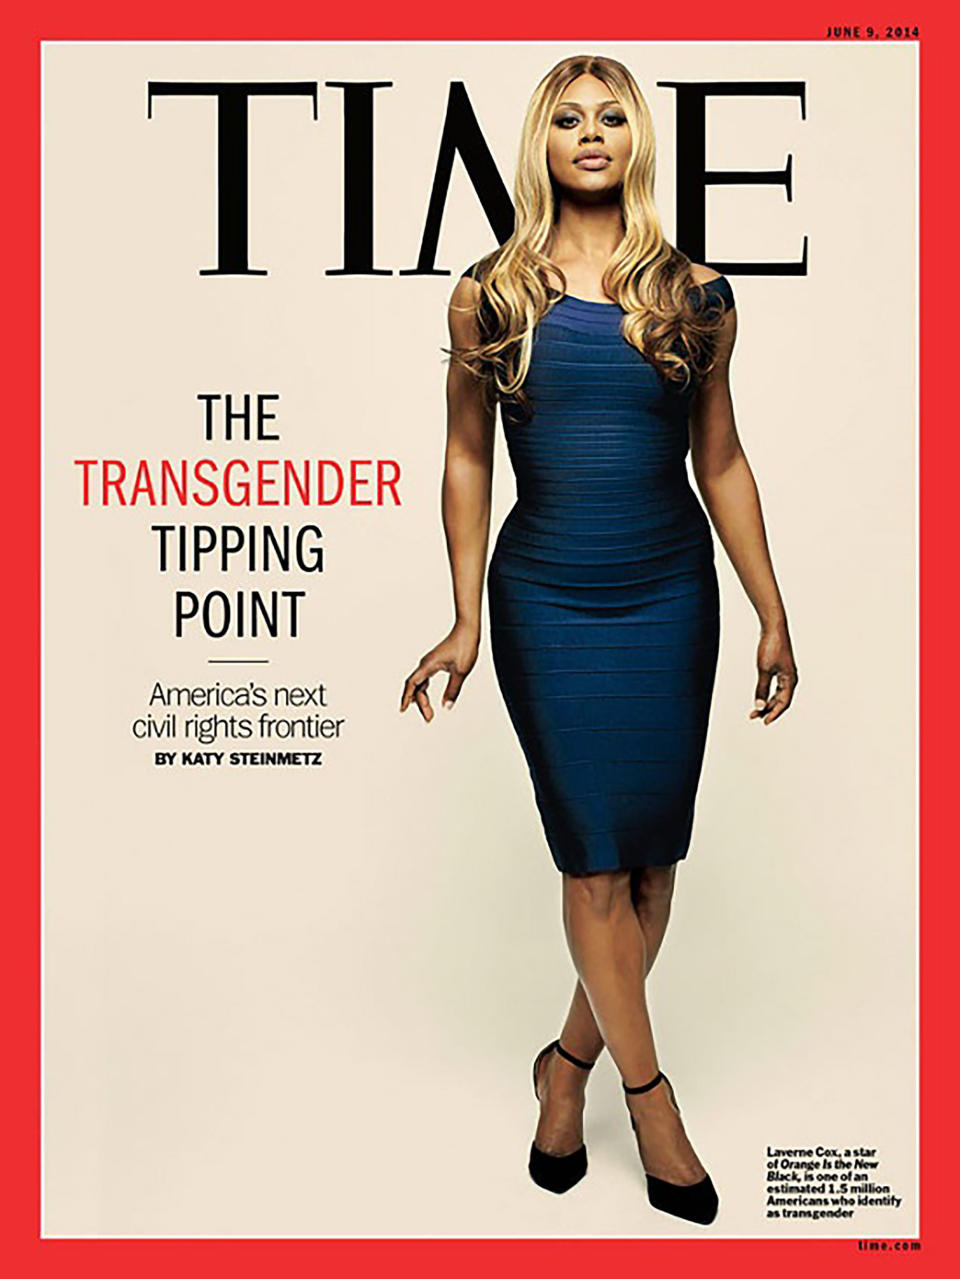 Actress and trans activist Laverne Cox graced Time Magazine's July 2014 cover, representing the fight for trans rights as "America's next civil rights frontier." Cox was the first trans person to be on the influential magazine's cover.